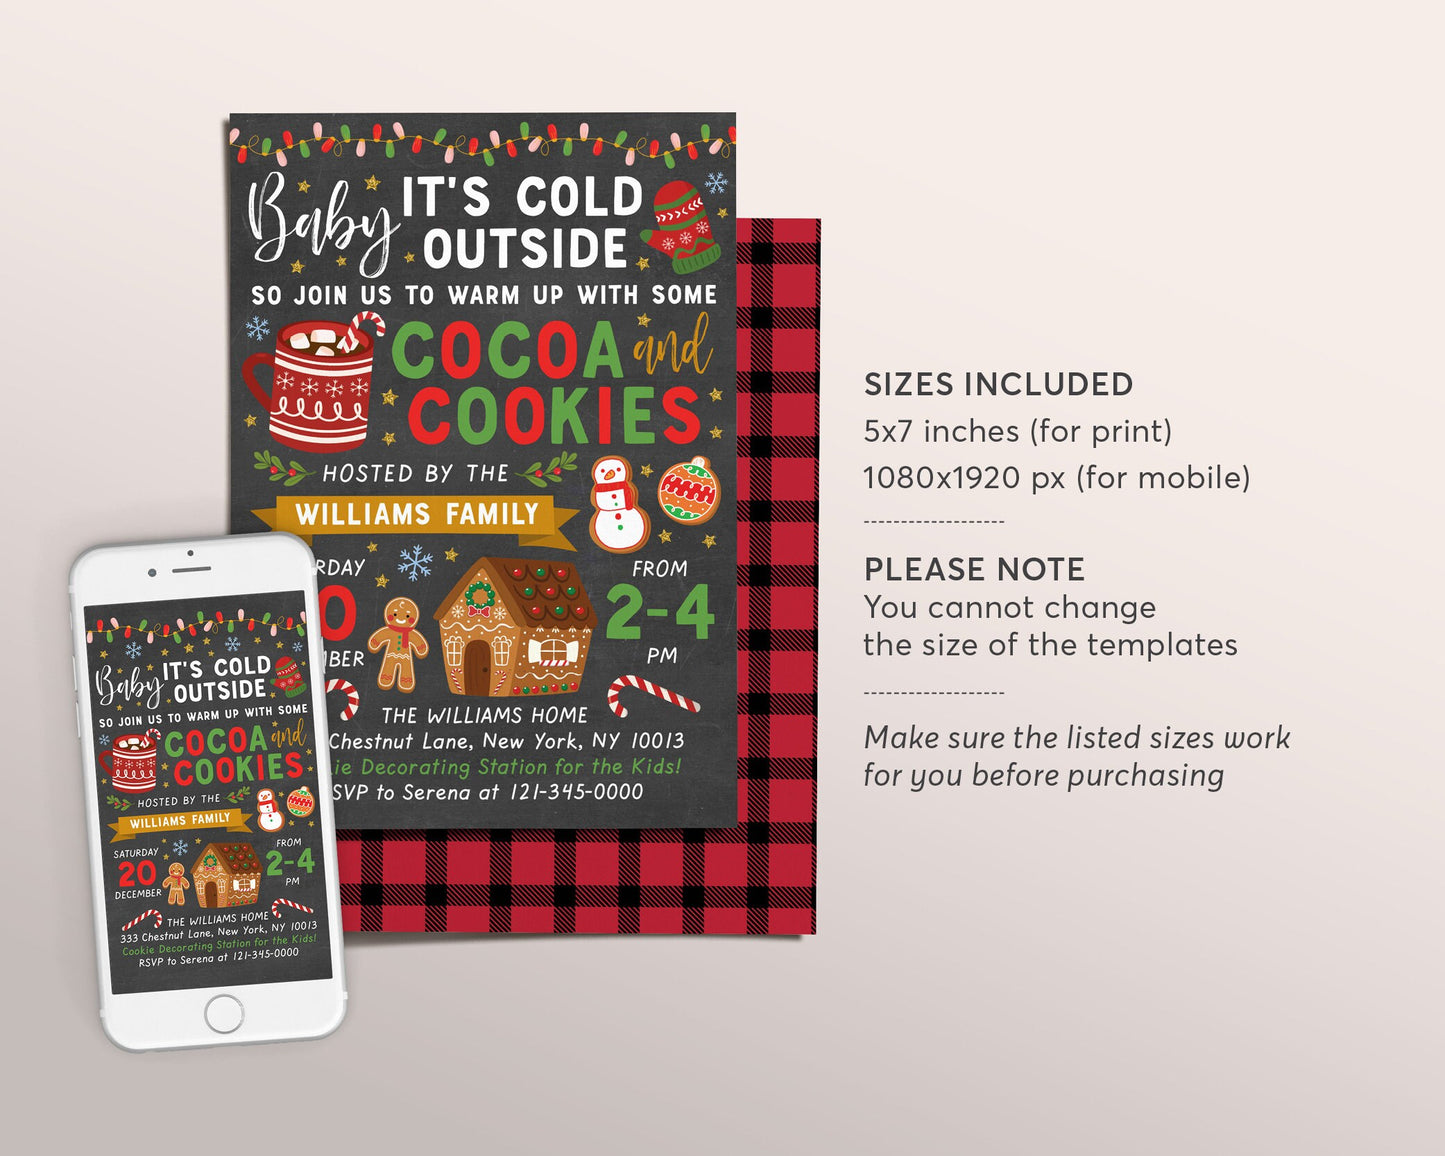 Hot Cocoa And Cookies Christmas Party Invitation Editable Template, Baby Its Cold Outside Xmas Invite, Buffalo Plaid Holiday Party Invite